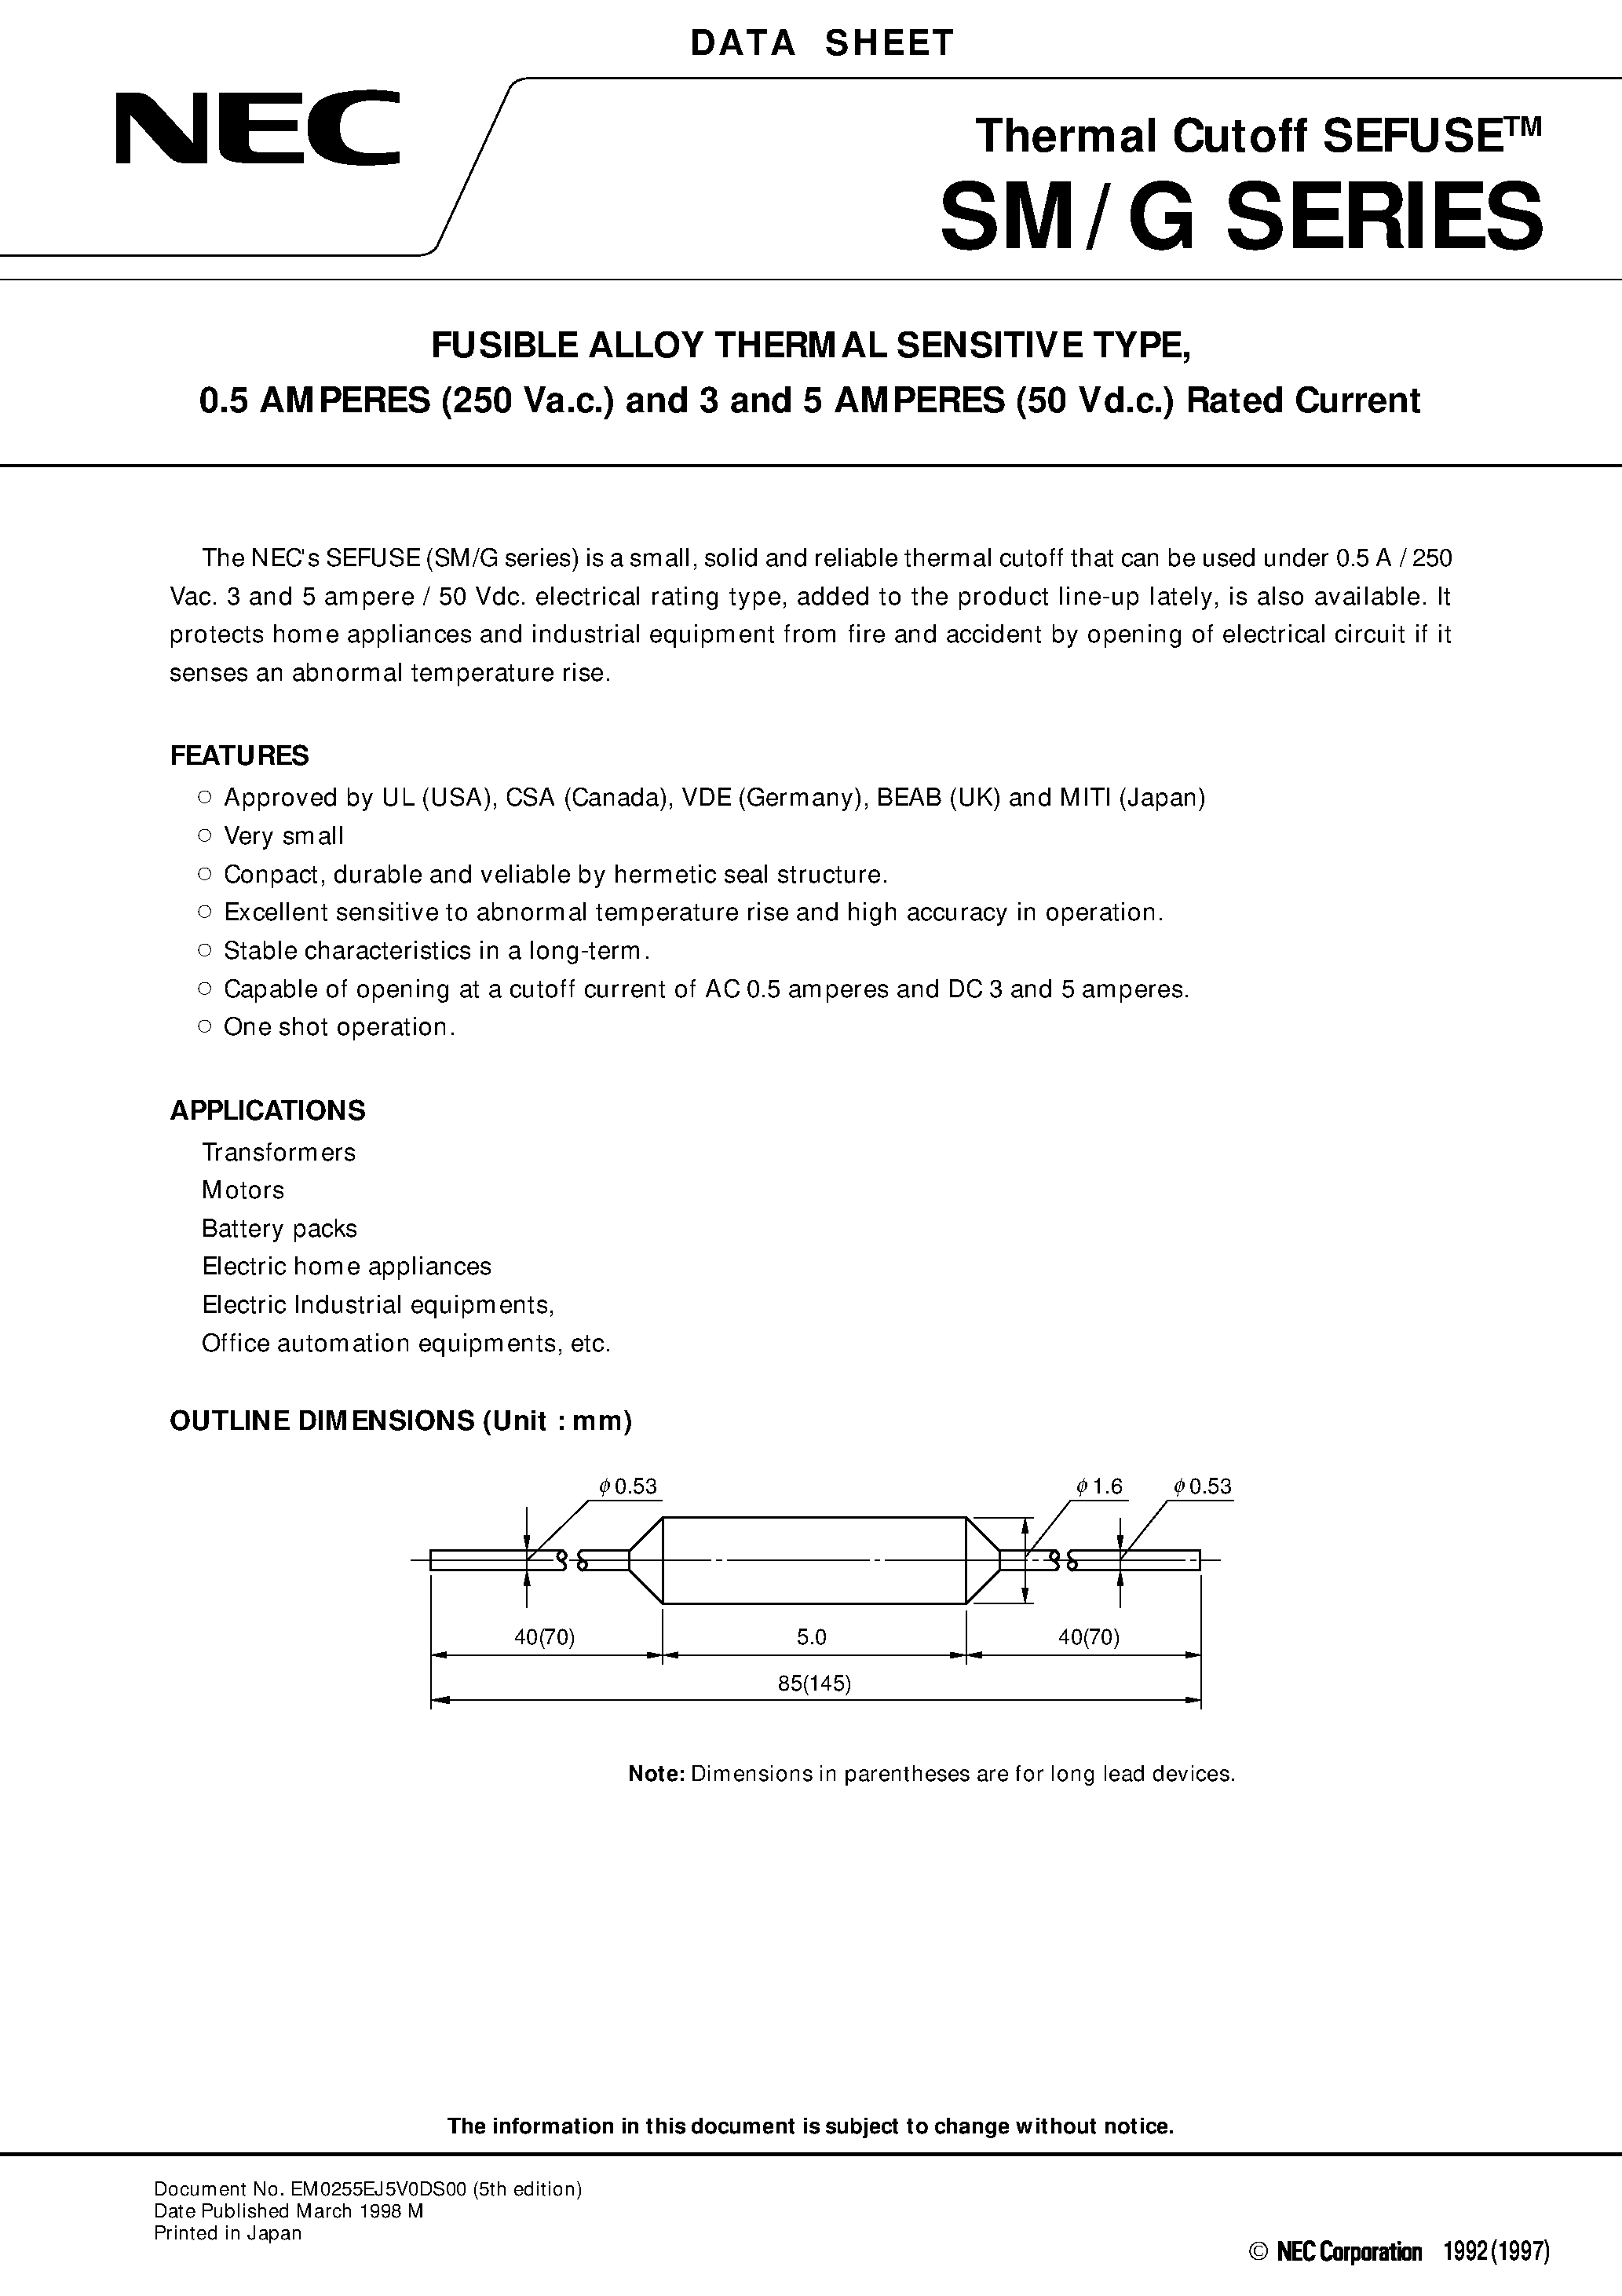 Datasheet SM134G0 - FUSIBLE ALLOY THERMAL SENSITIVE TYPE/ 0.5 AMPERES 250 Va.c. and 3 and 5 AMPERES 50 Vd.c. Rated Current page 1